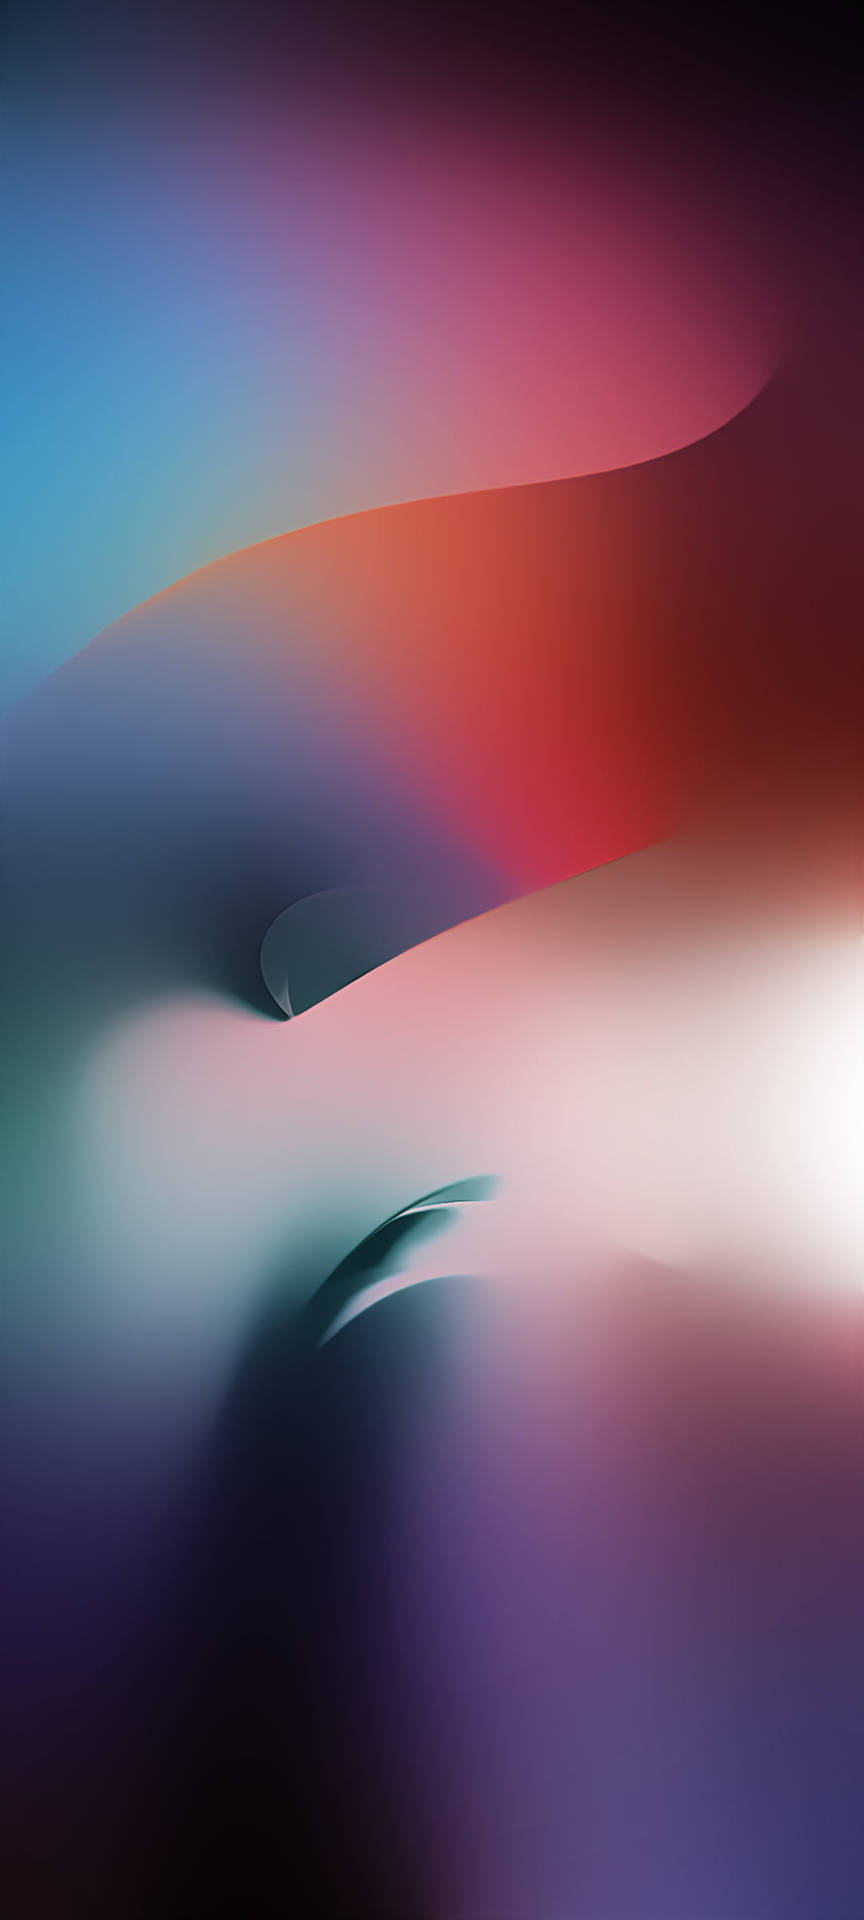 Download Poco X2 Blurry Abstract Wallpaper | Wallpapers.com